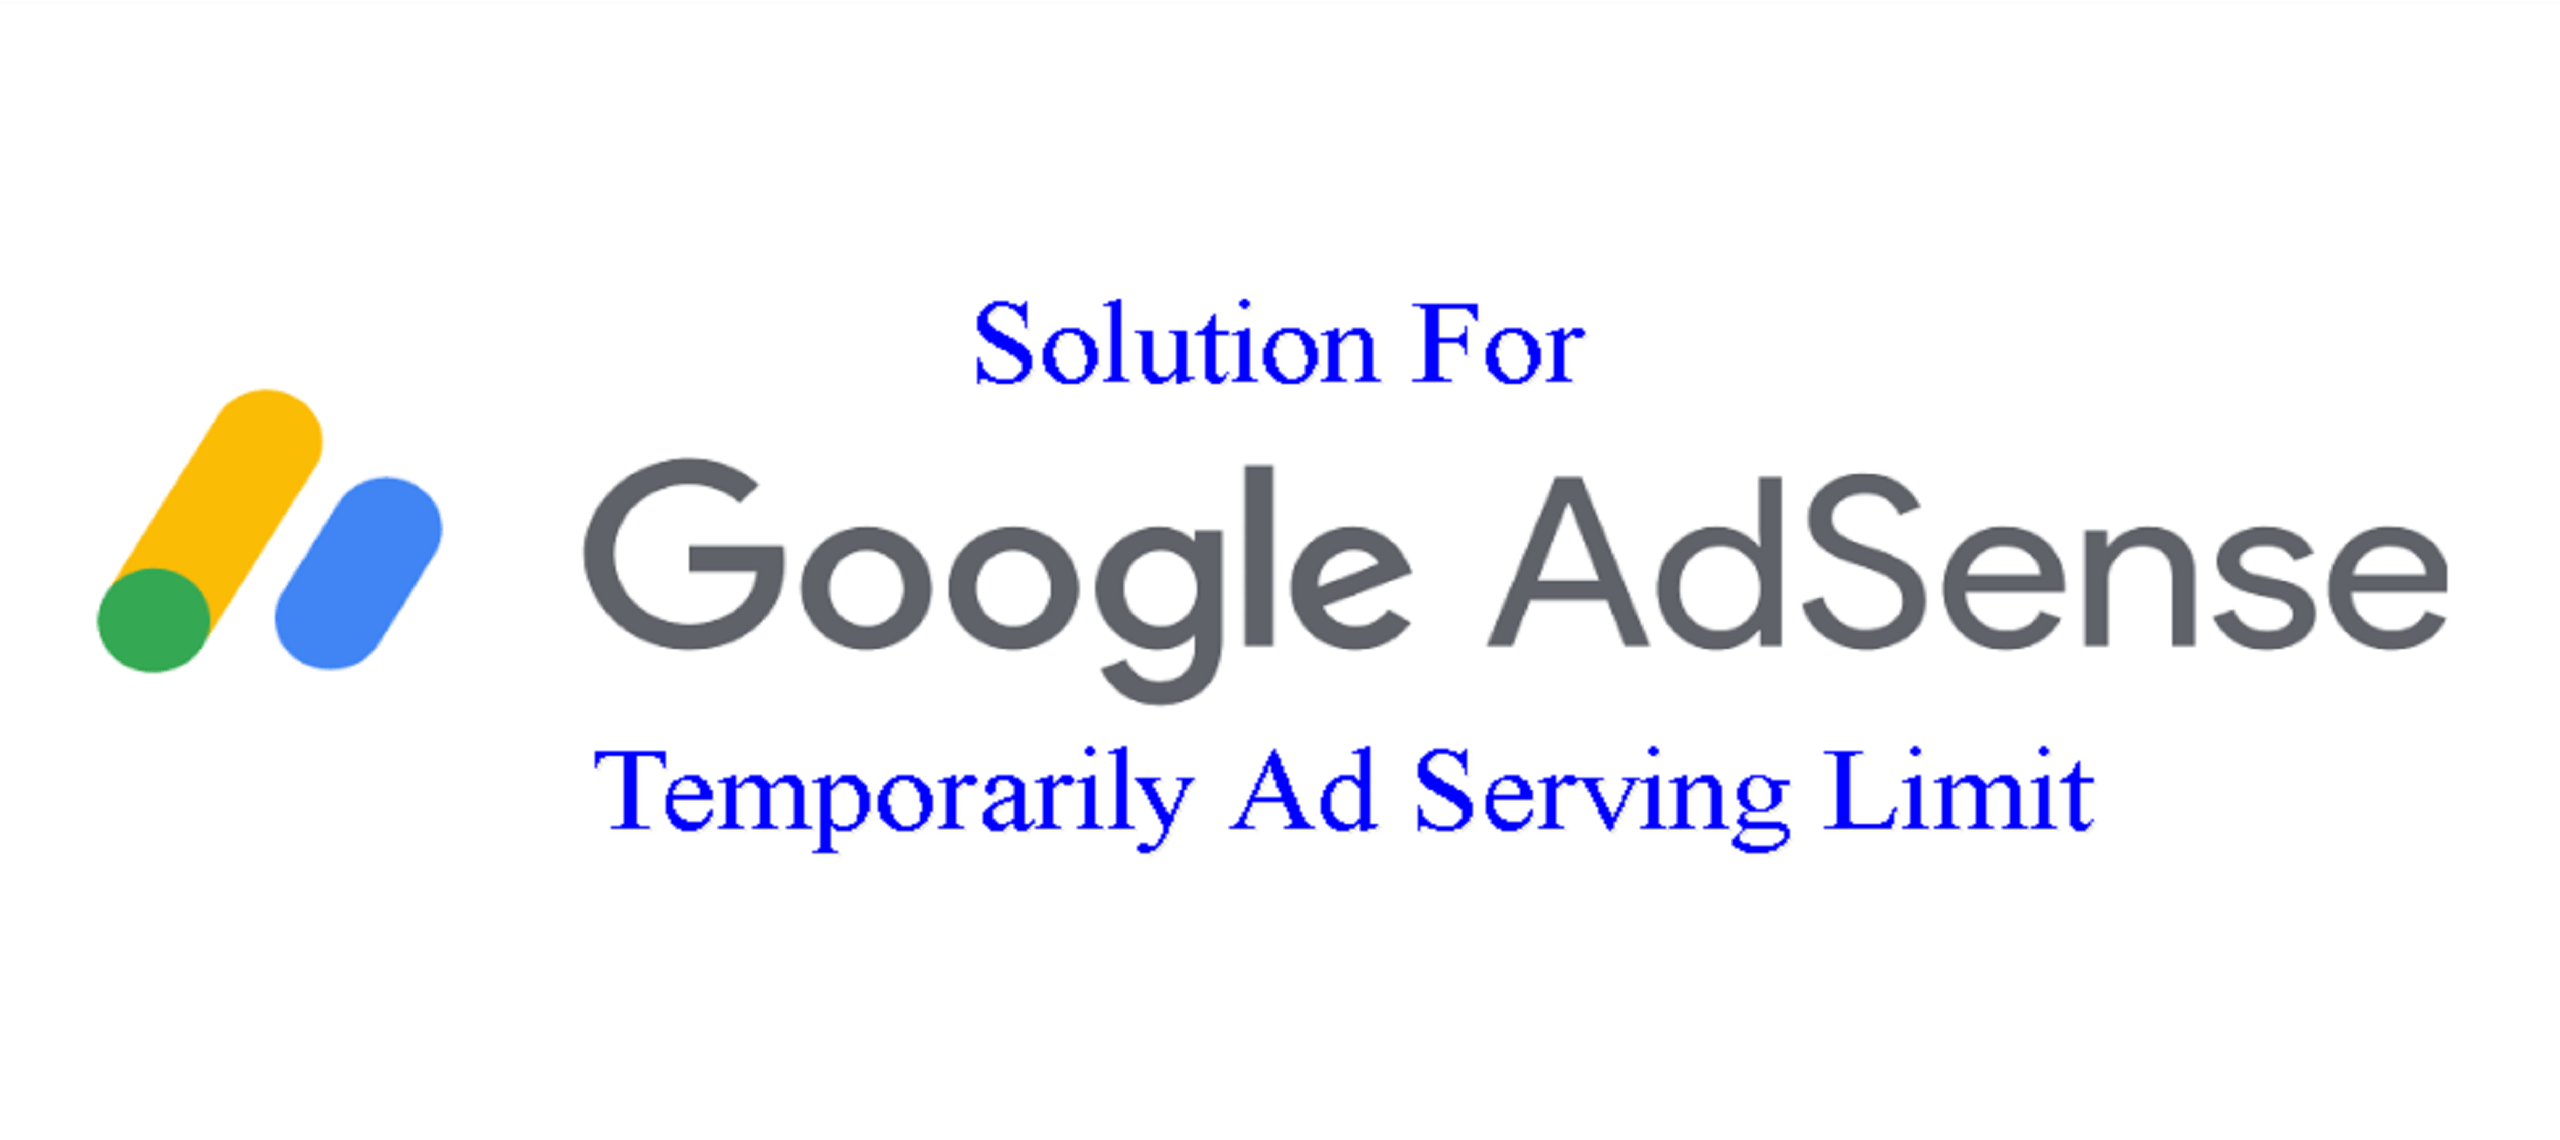 How to solve Google AdSense ad serving has been limited